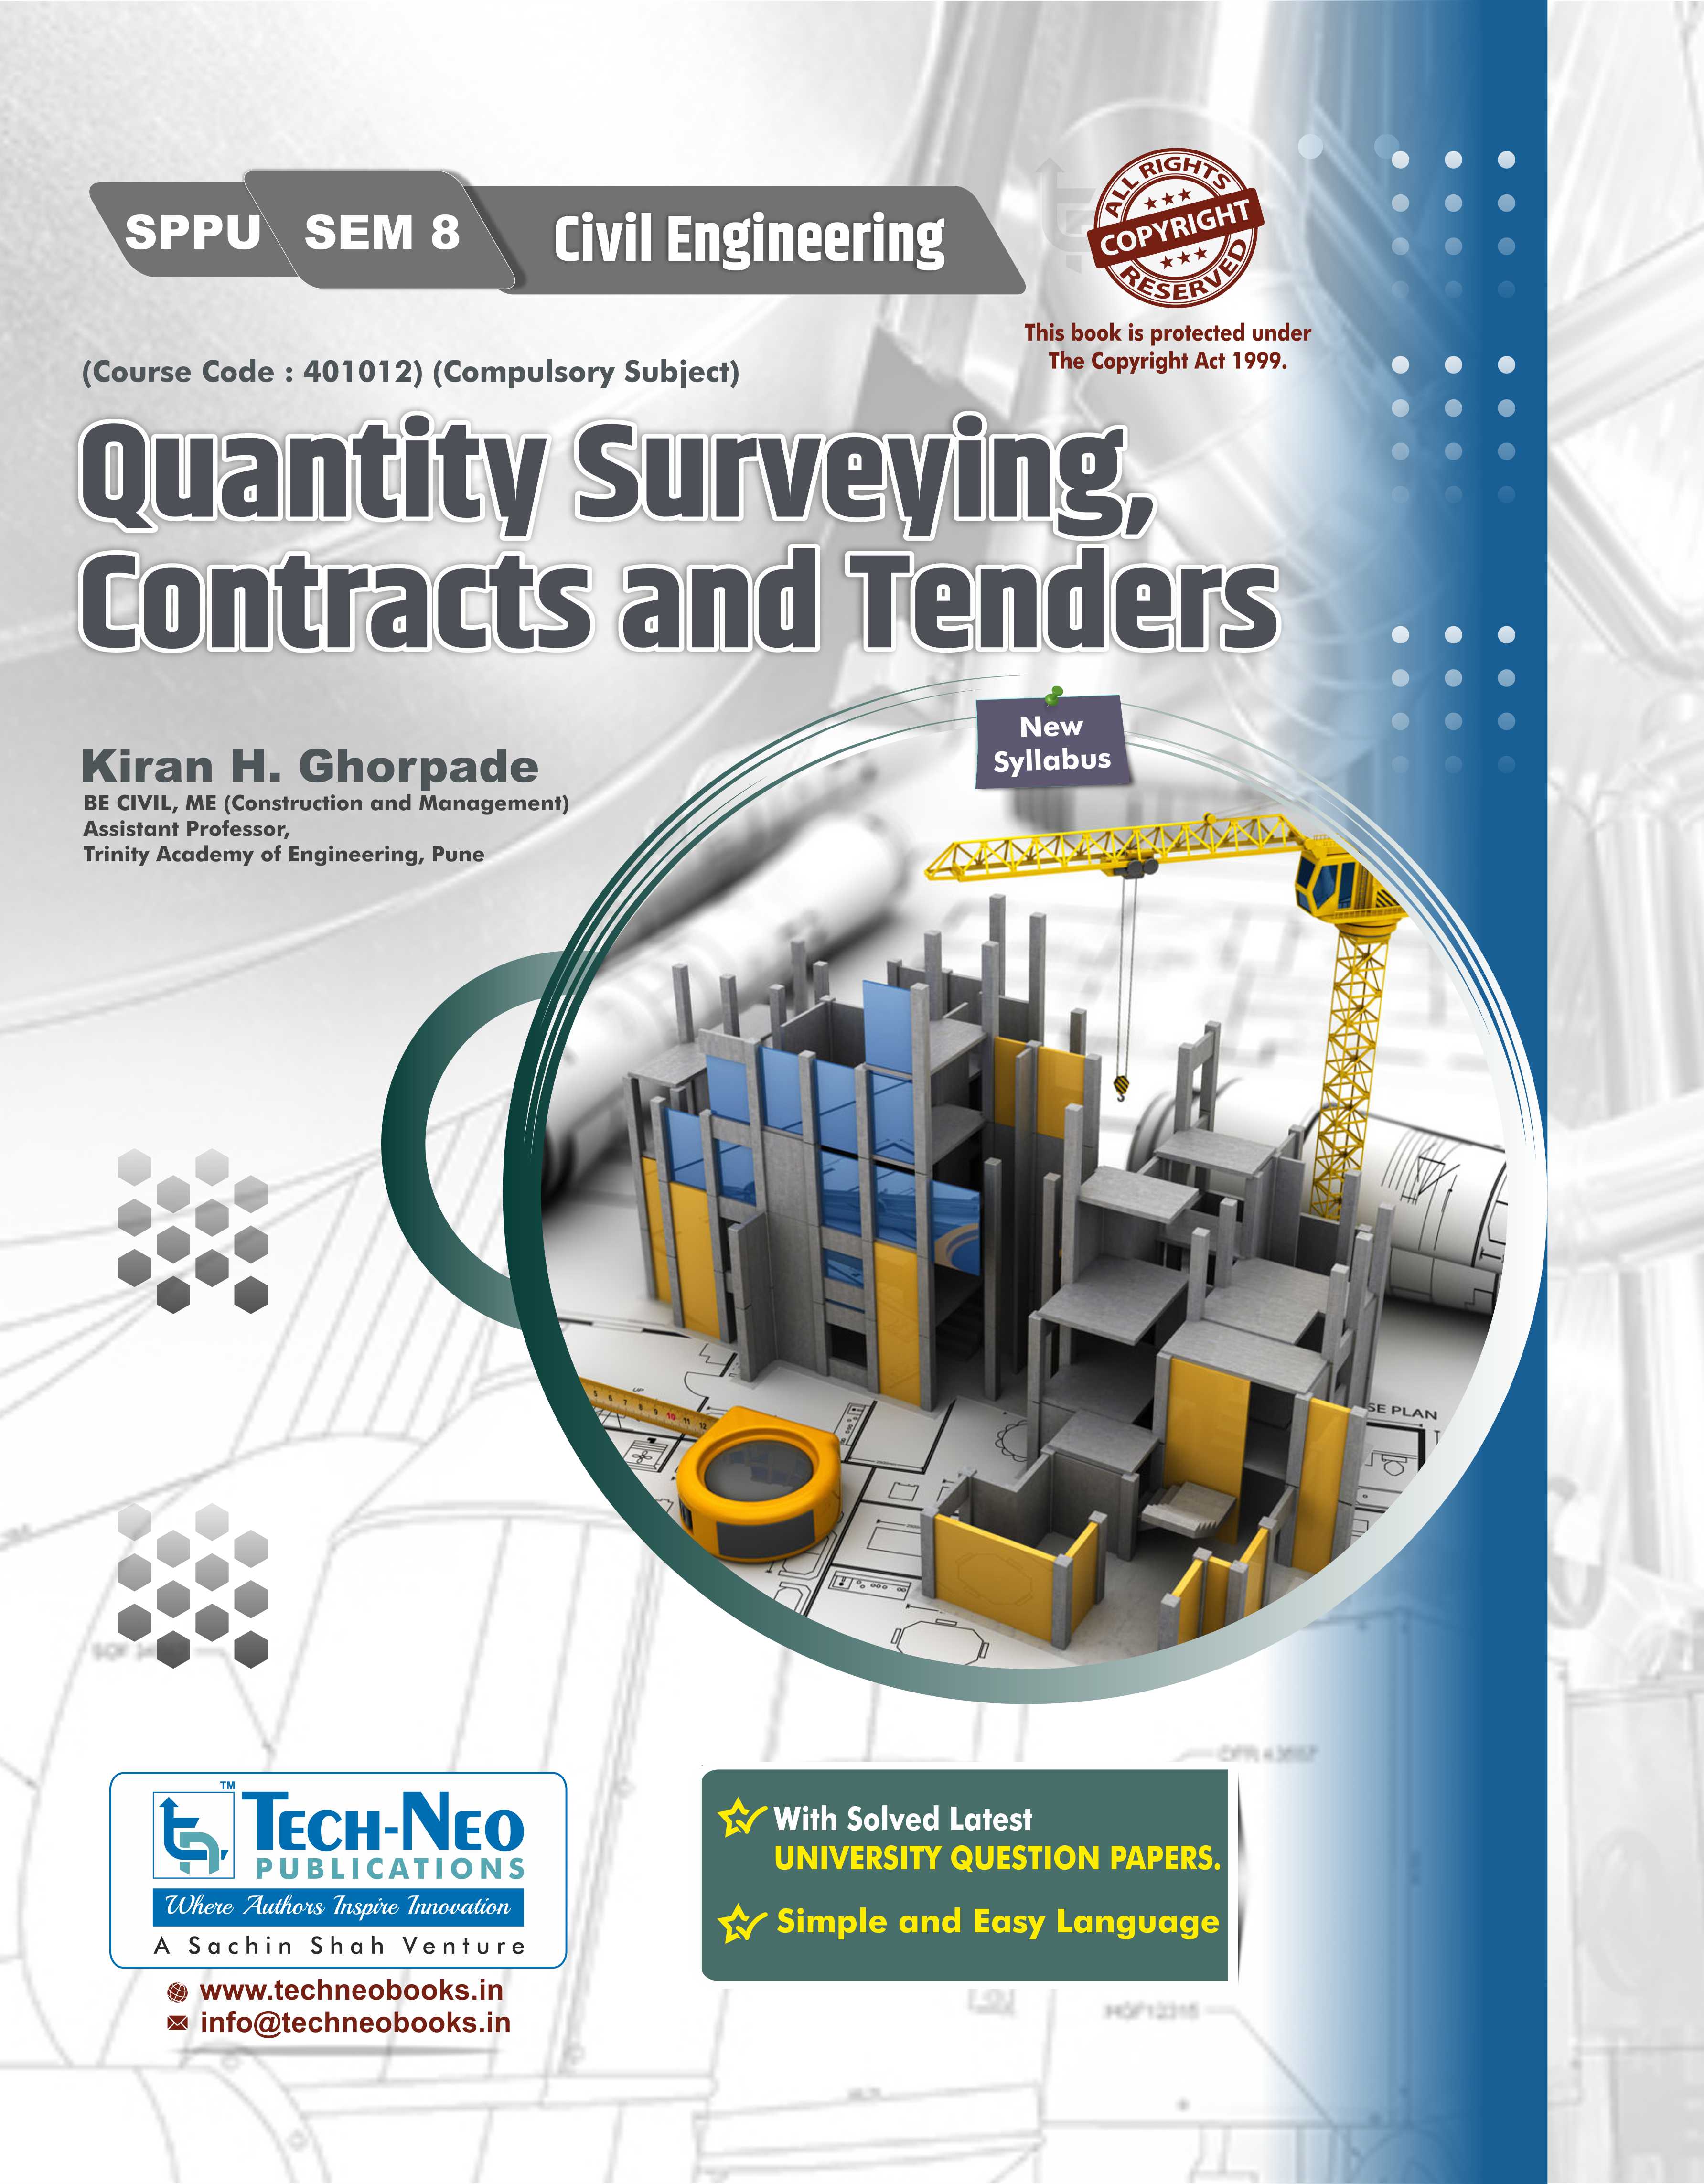 Quantity Surveying, Contracts and Tenders